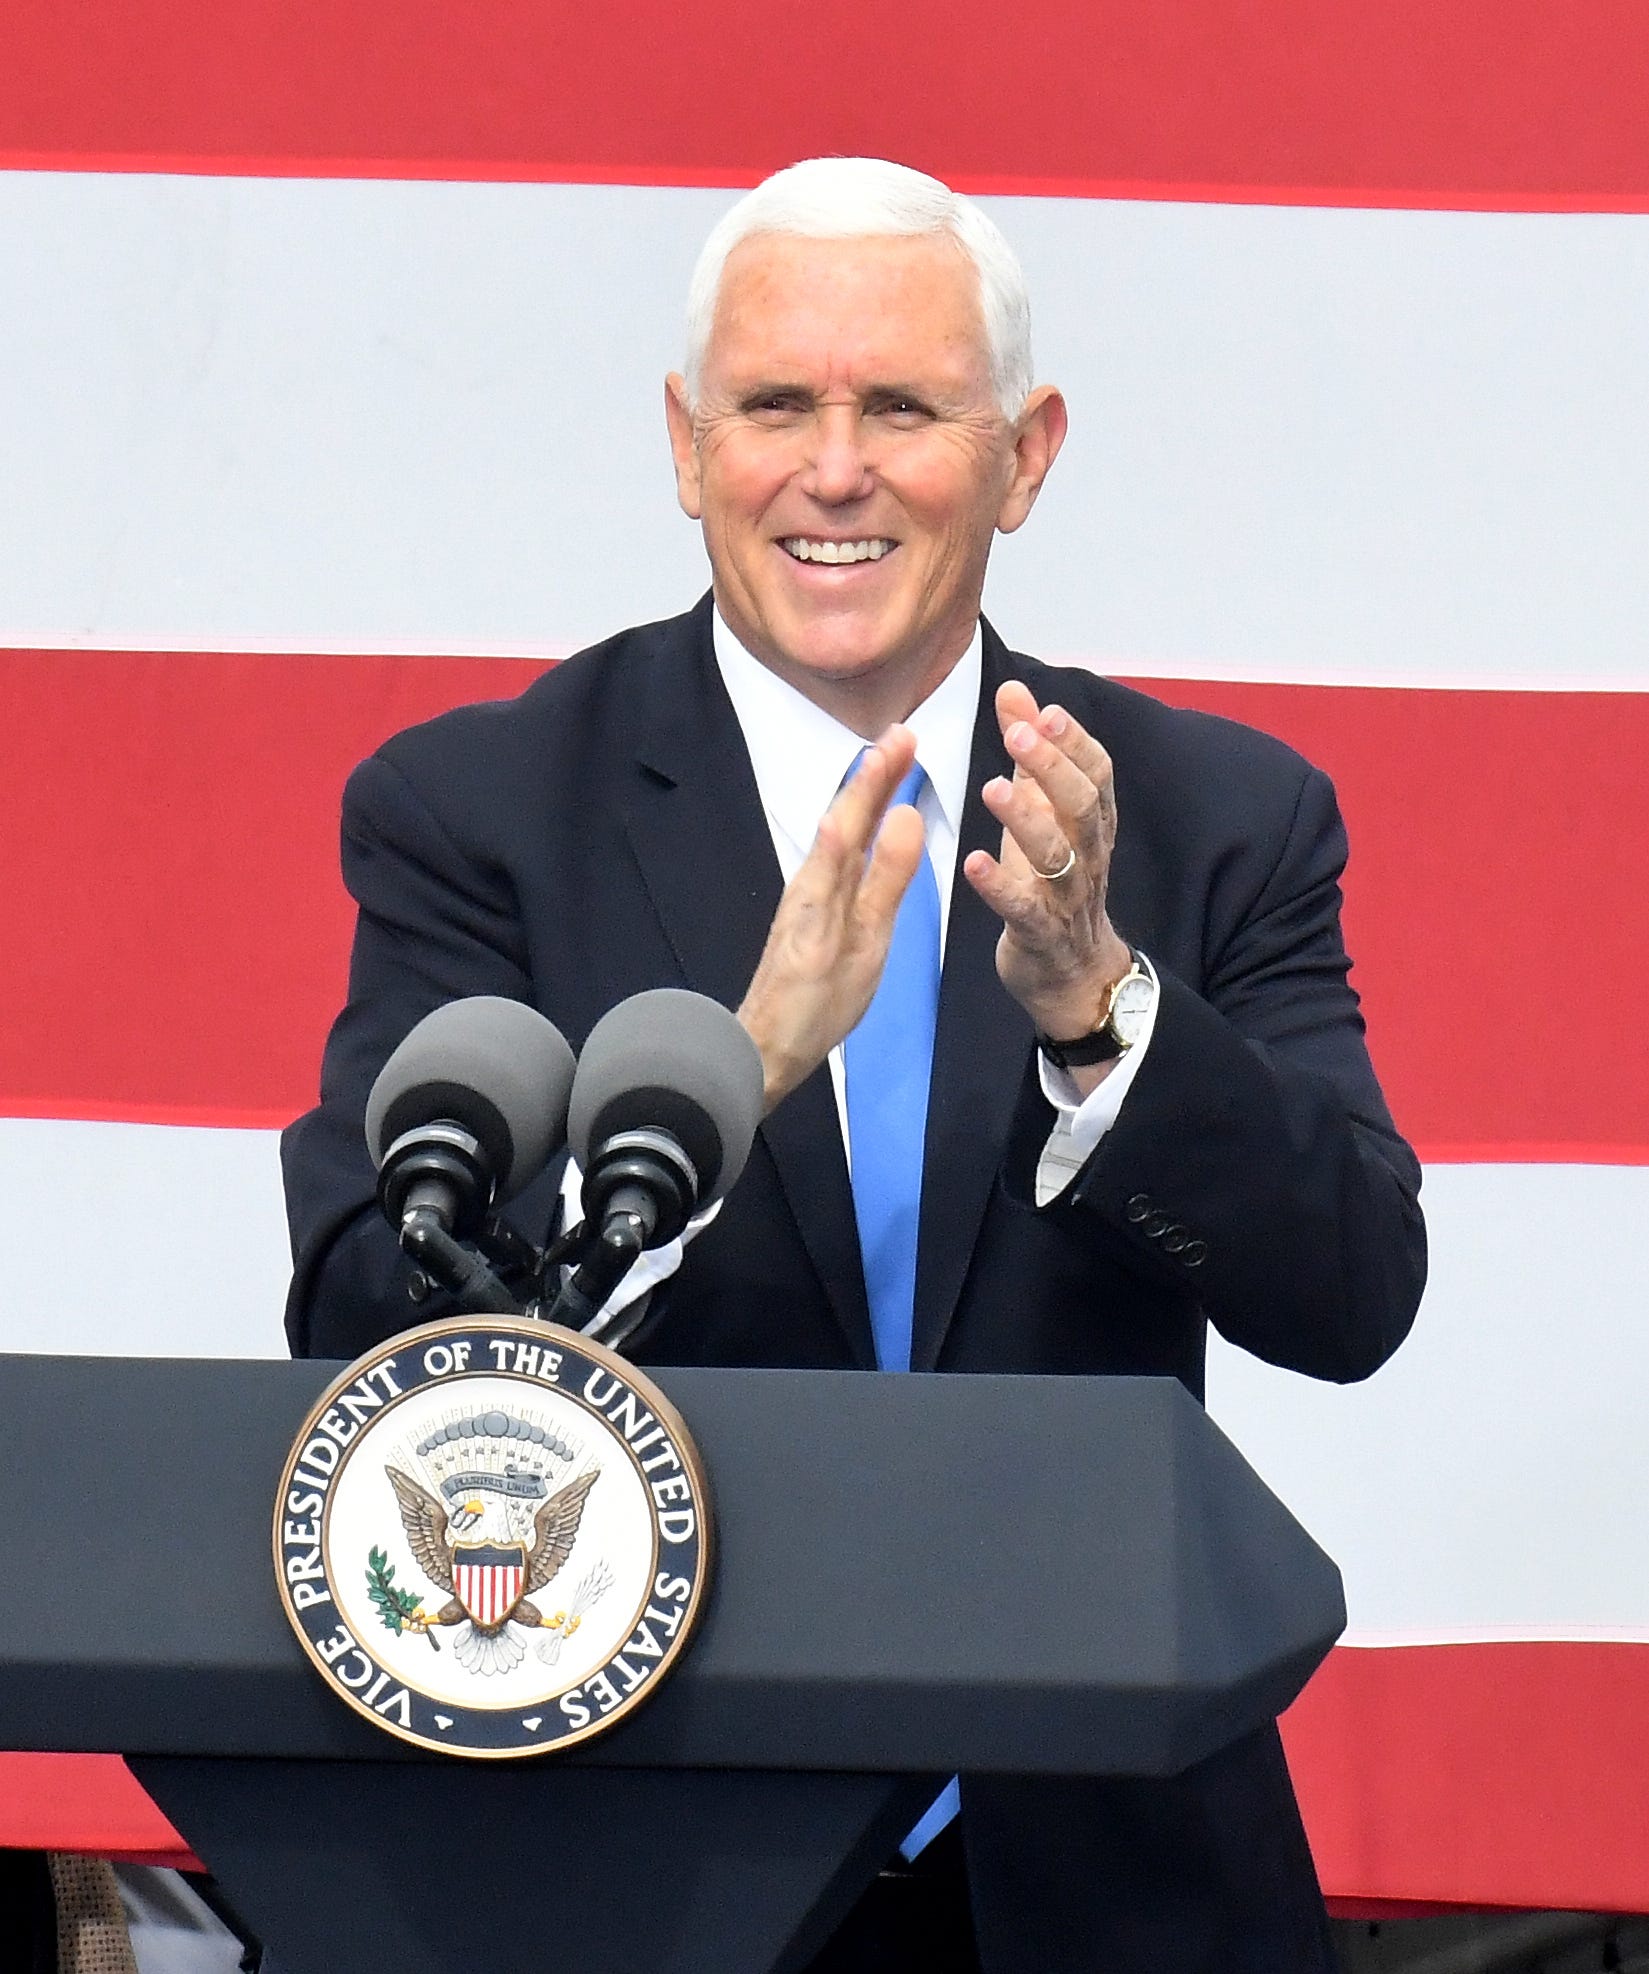 Vice President Mike Pence holds an outdoor campaign stop at Lacks Enterprises Inc. in Grand Rapids, Michigan on October 14, 2020.